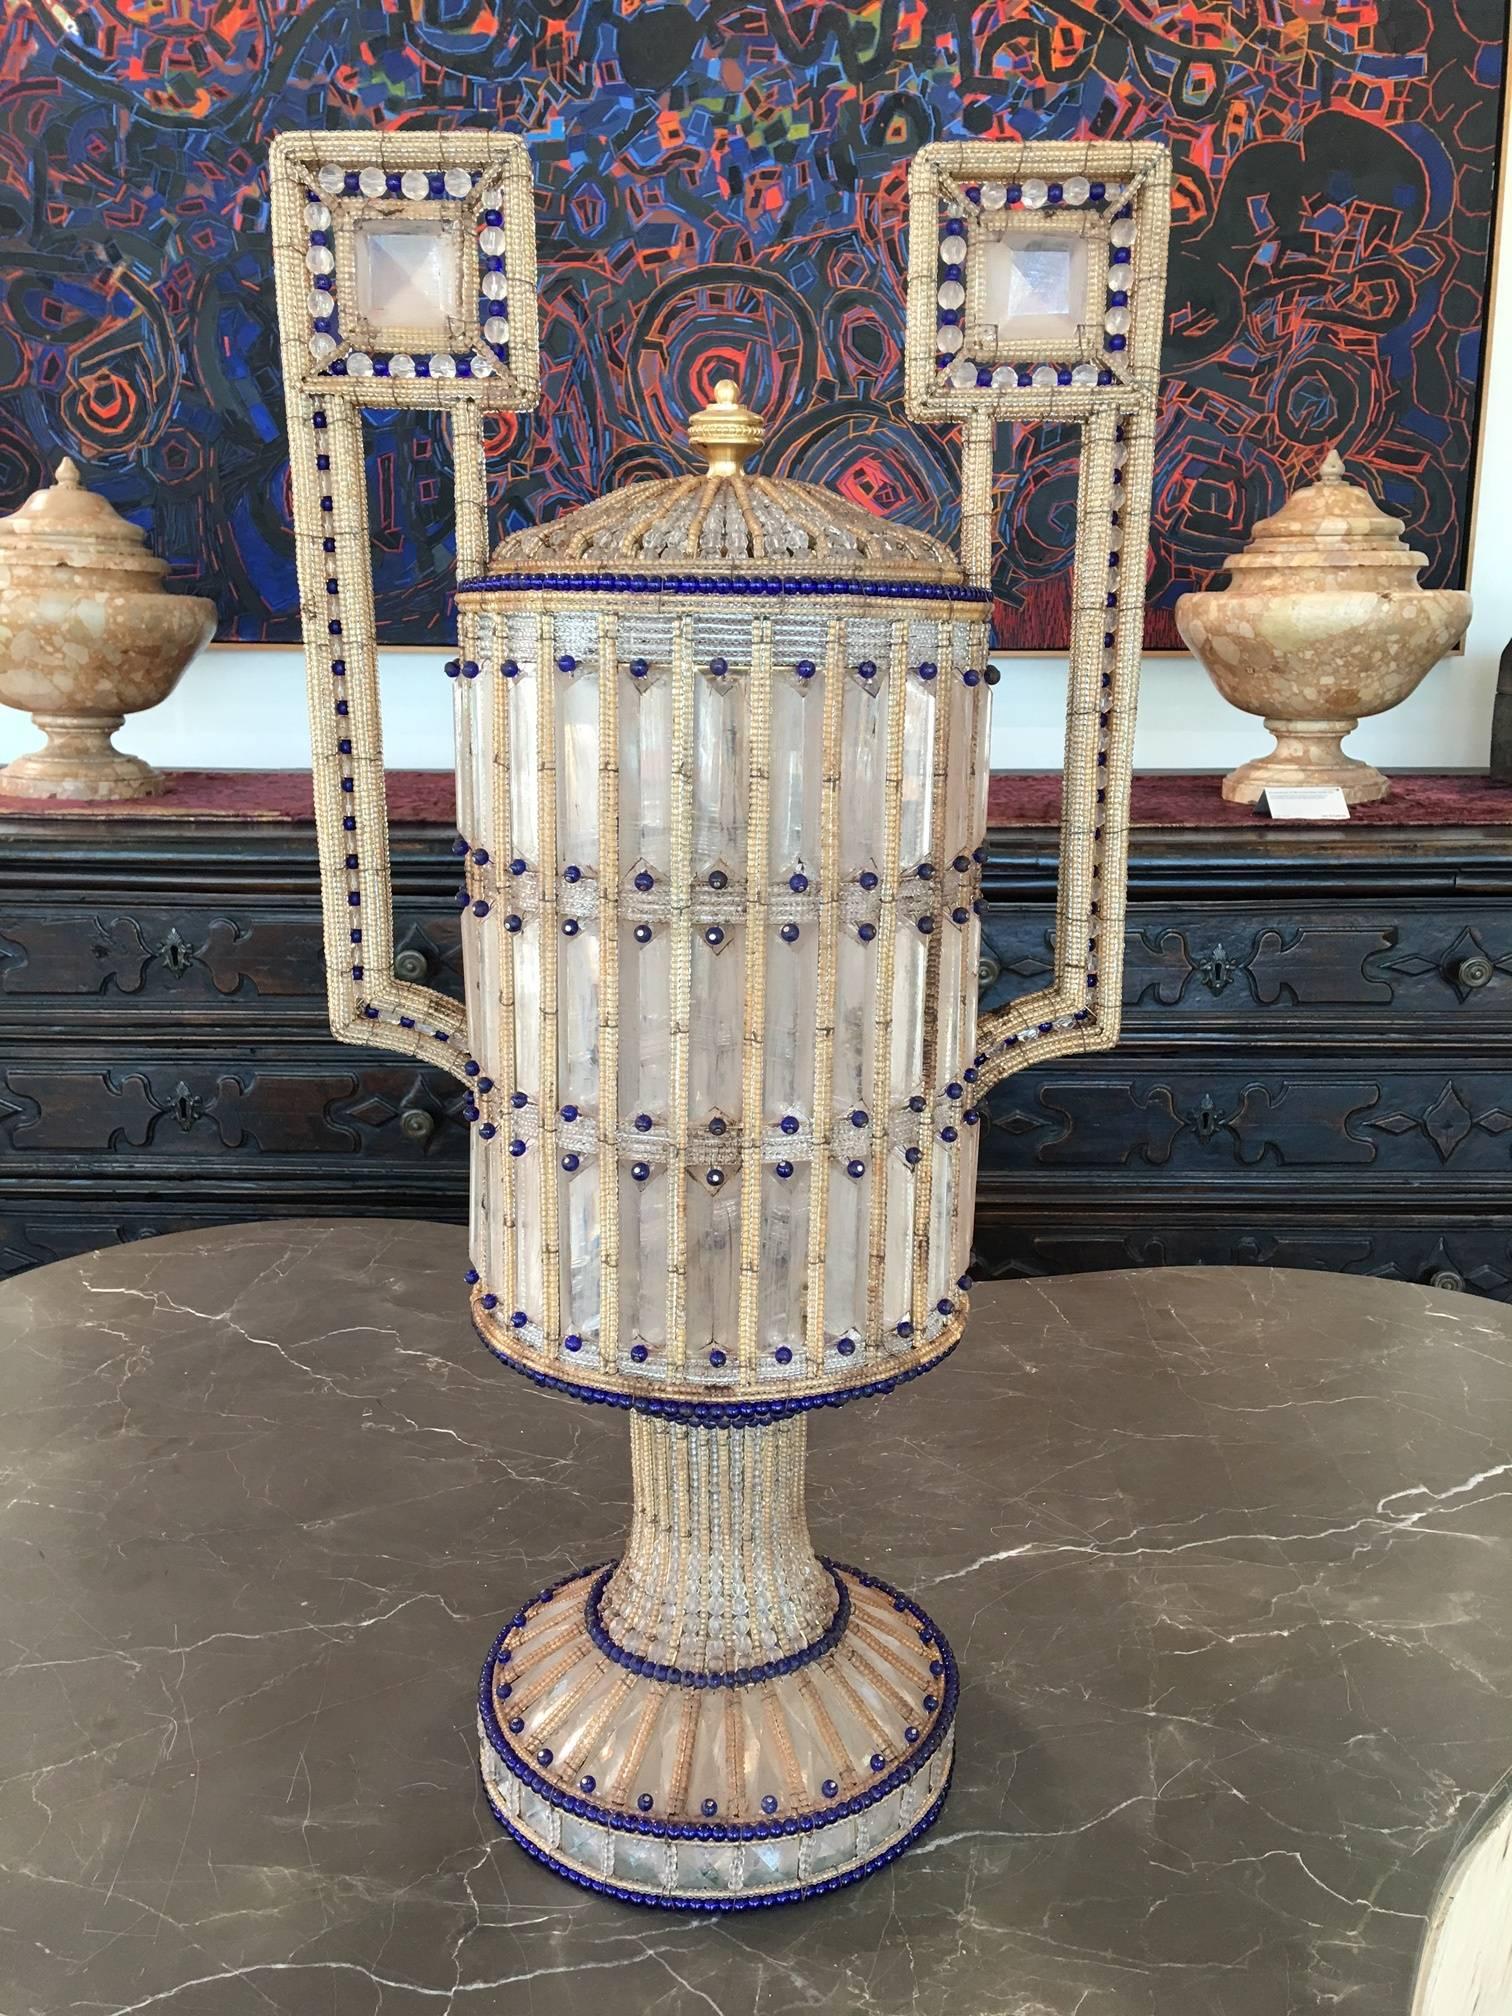 Each with a pair of Greek key-inspired handles. Their bodies comprised of elaborately strung geometric compositions of prismatic opaque glass with caramel and royal blue beads. Lids removable and all in a state of perfect condition.

Venice, circa